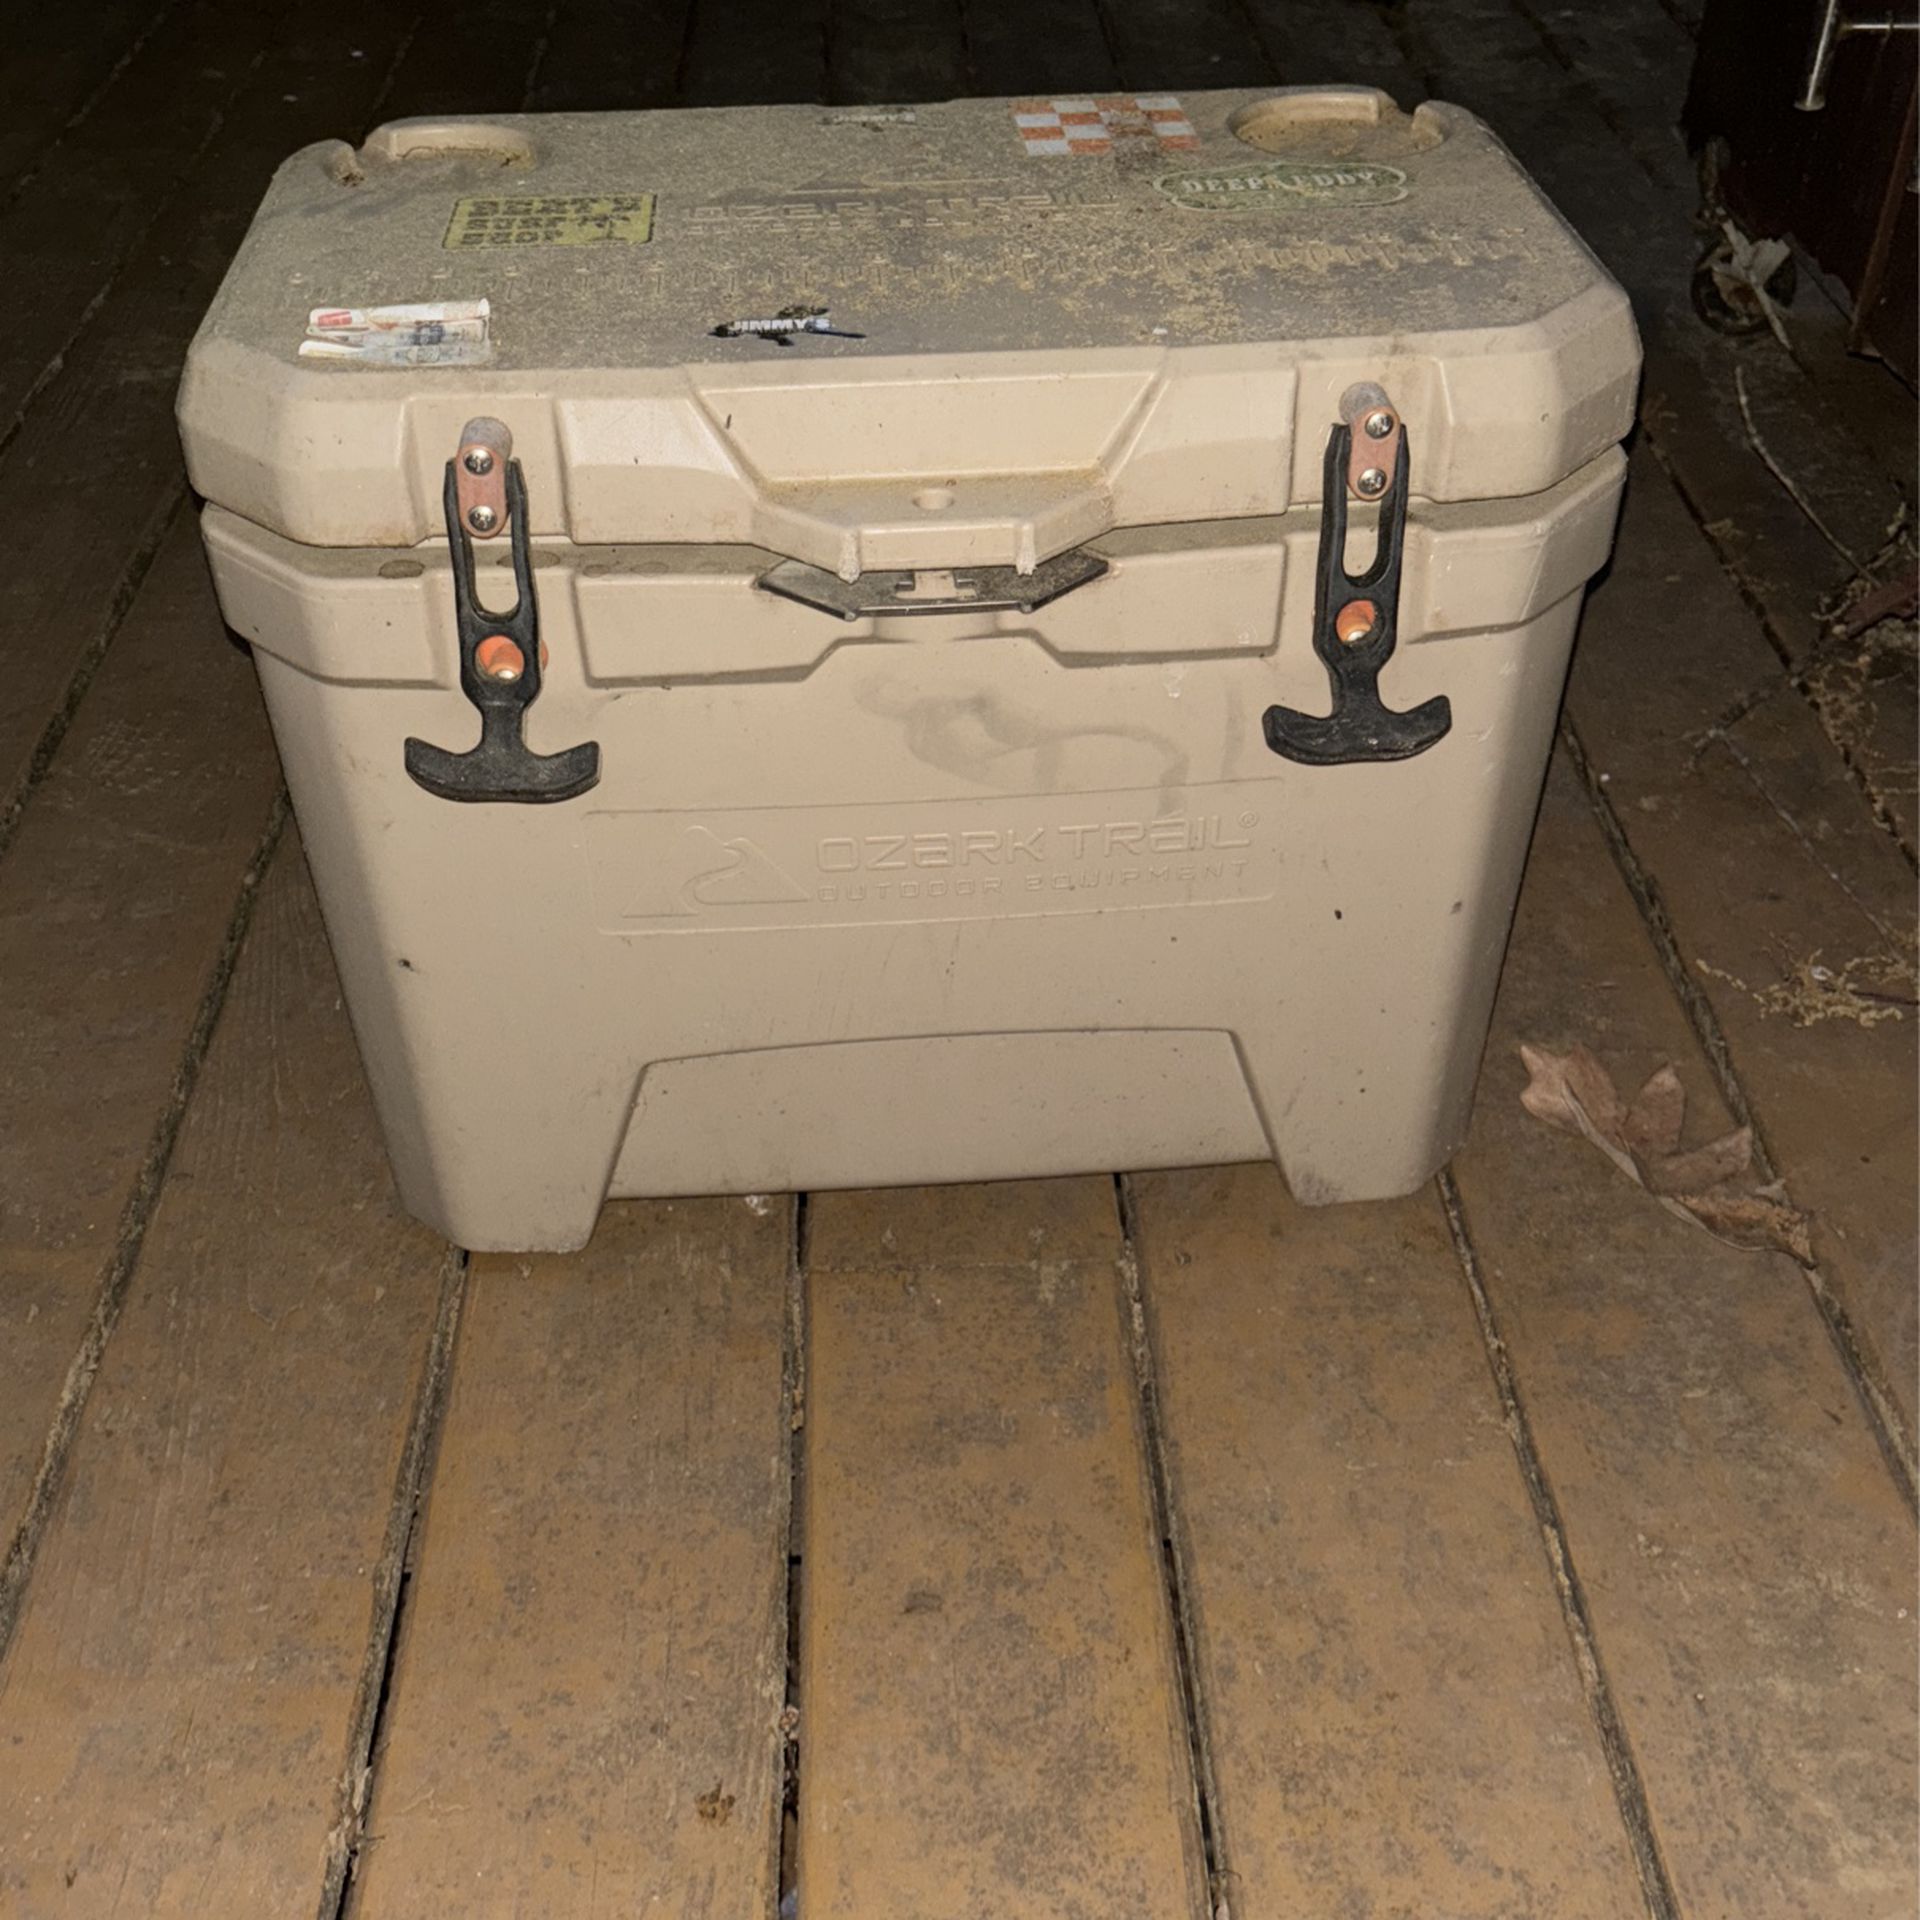 Ozark Trail Outdoor Equipment Insulated Cooler